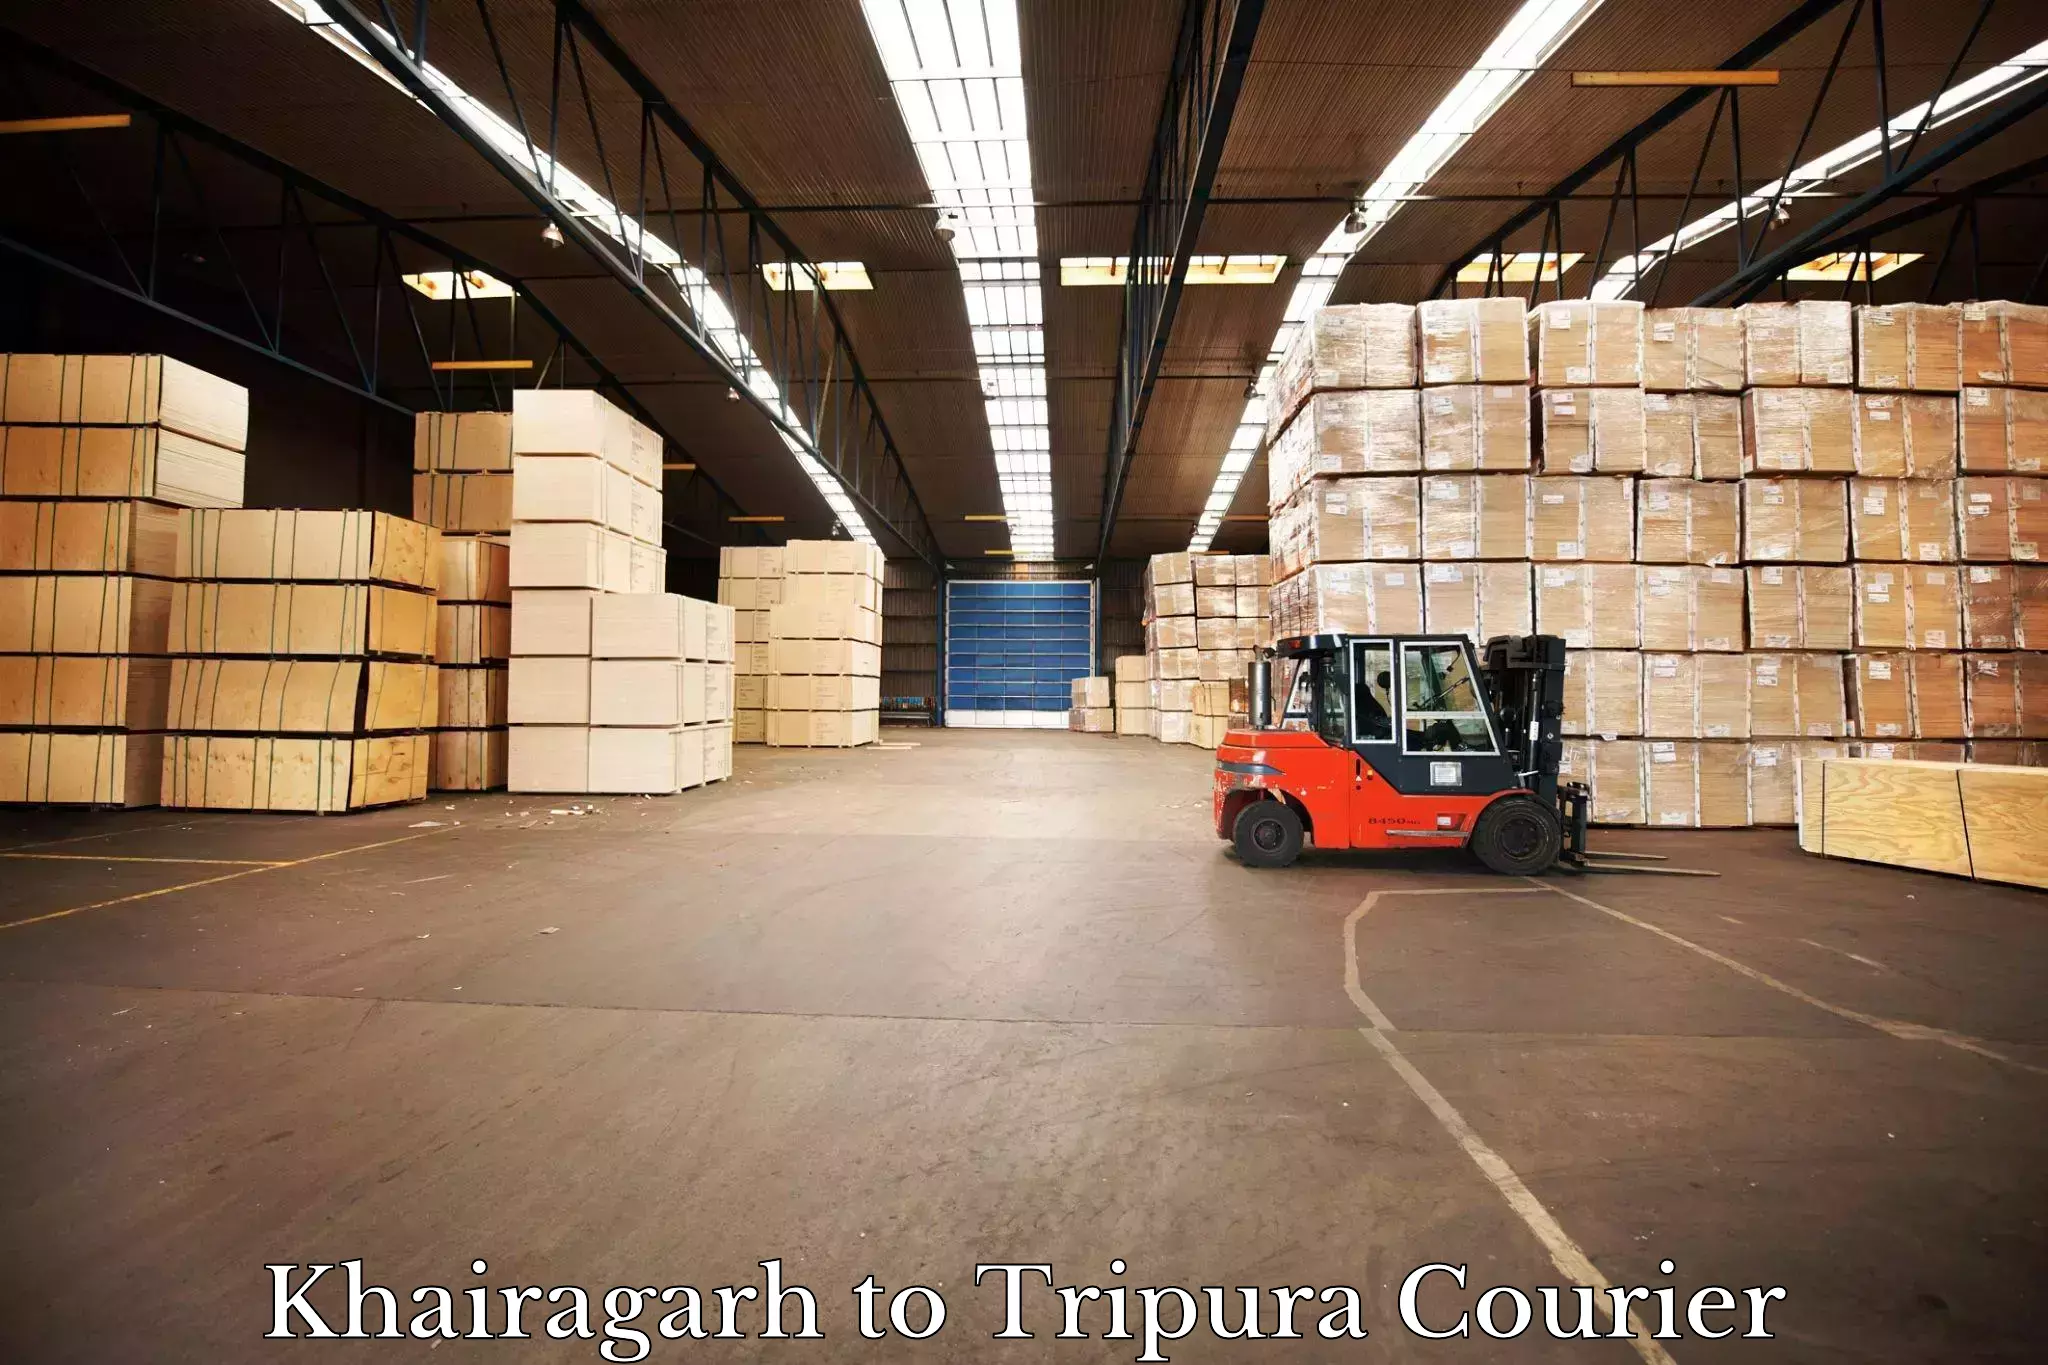 Express delivery capabilities Khairagarh to Tripura